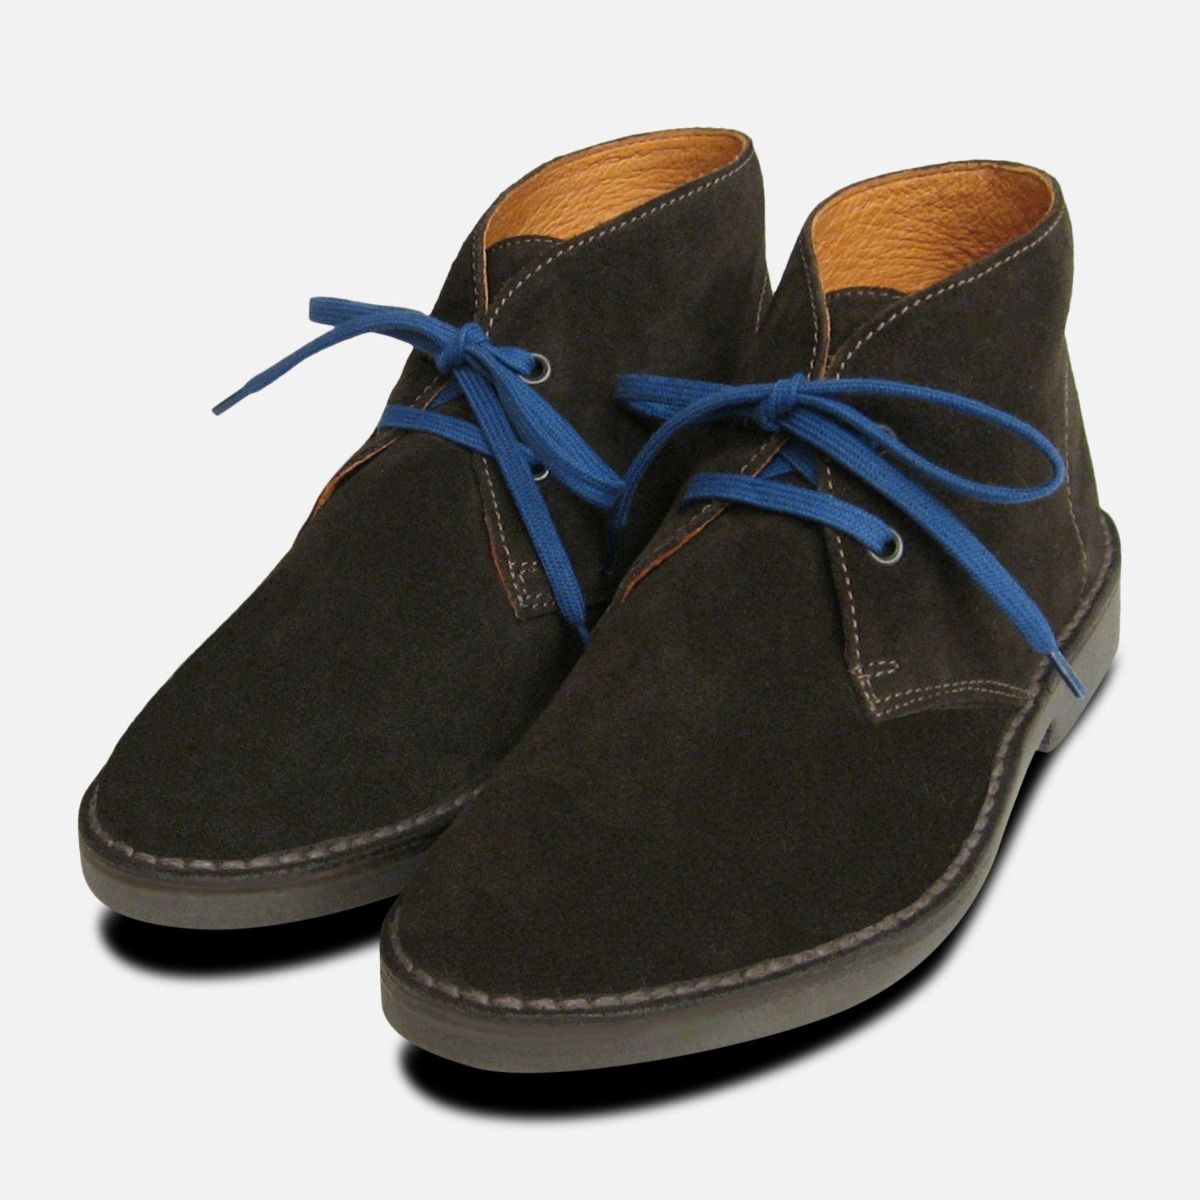 Womans Ladies Desert Boots Suede Leather Lace Up  3-8